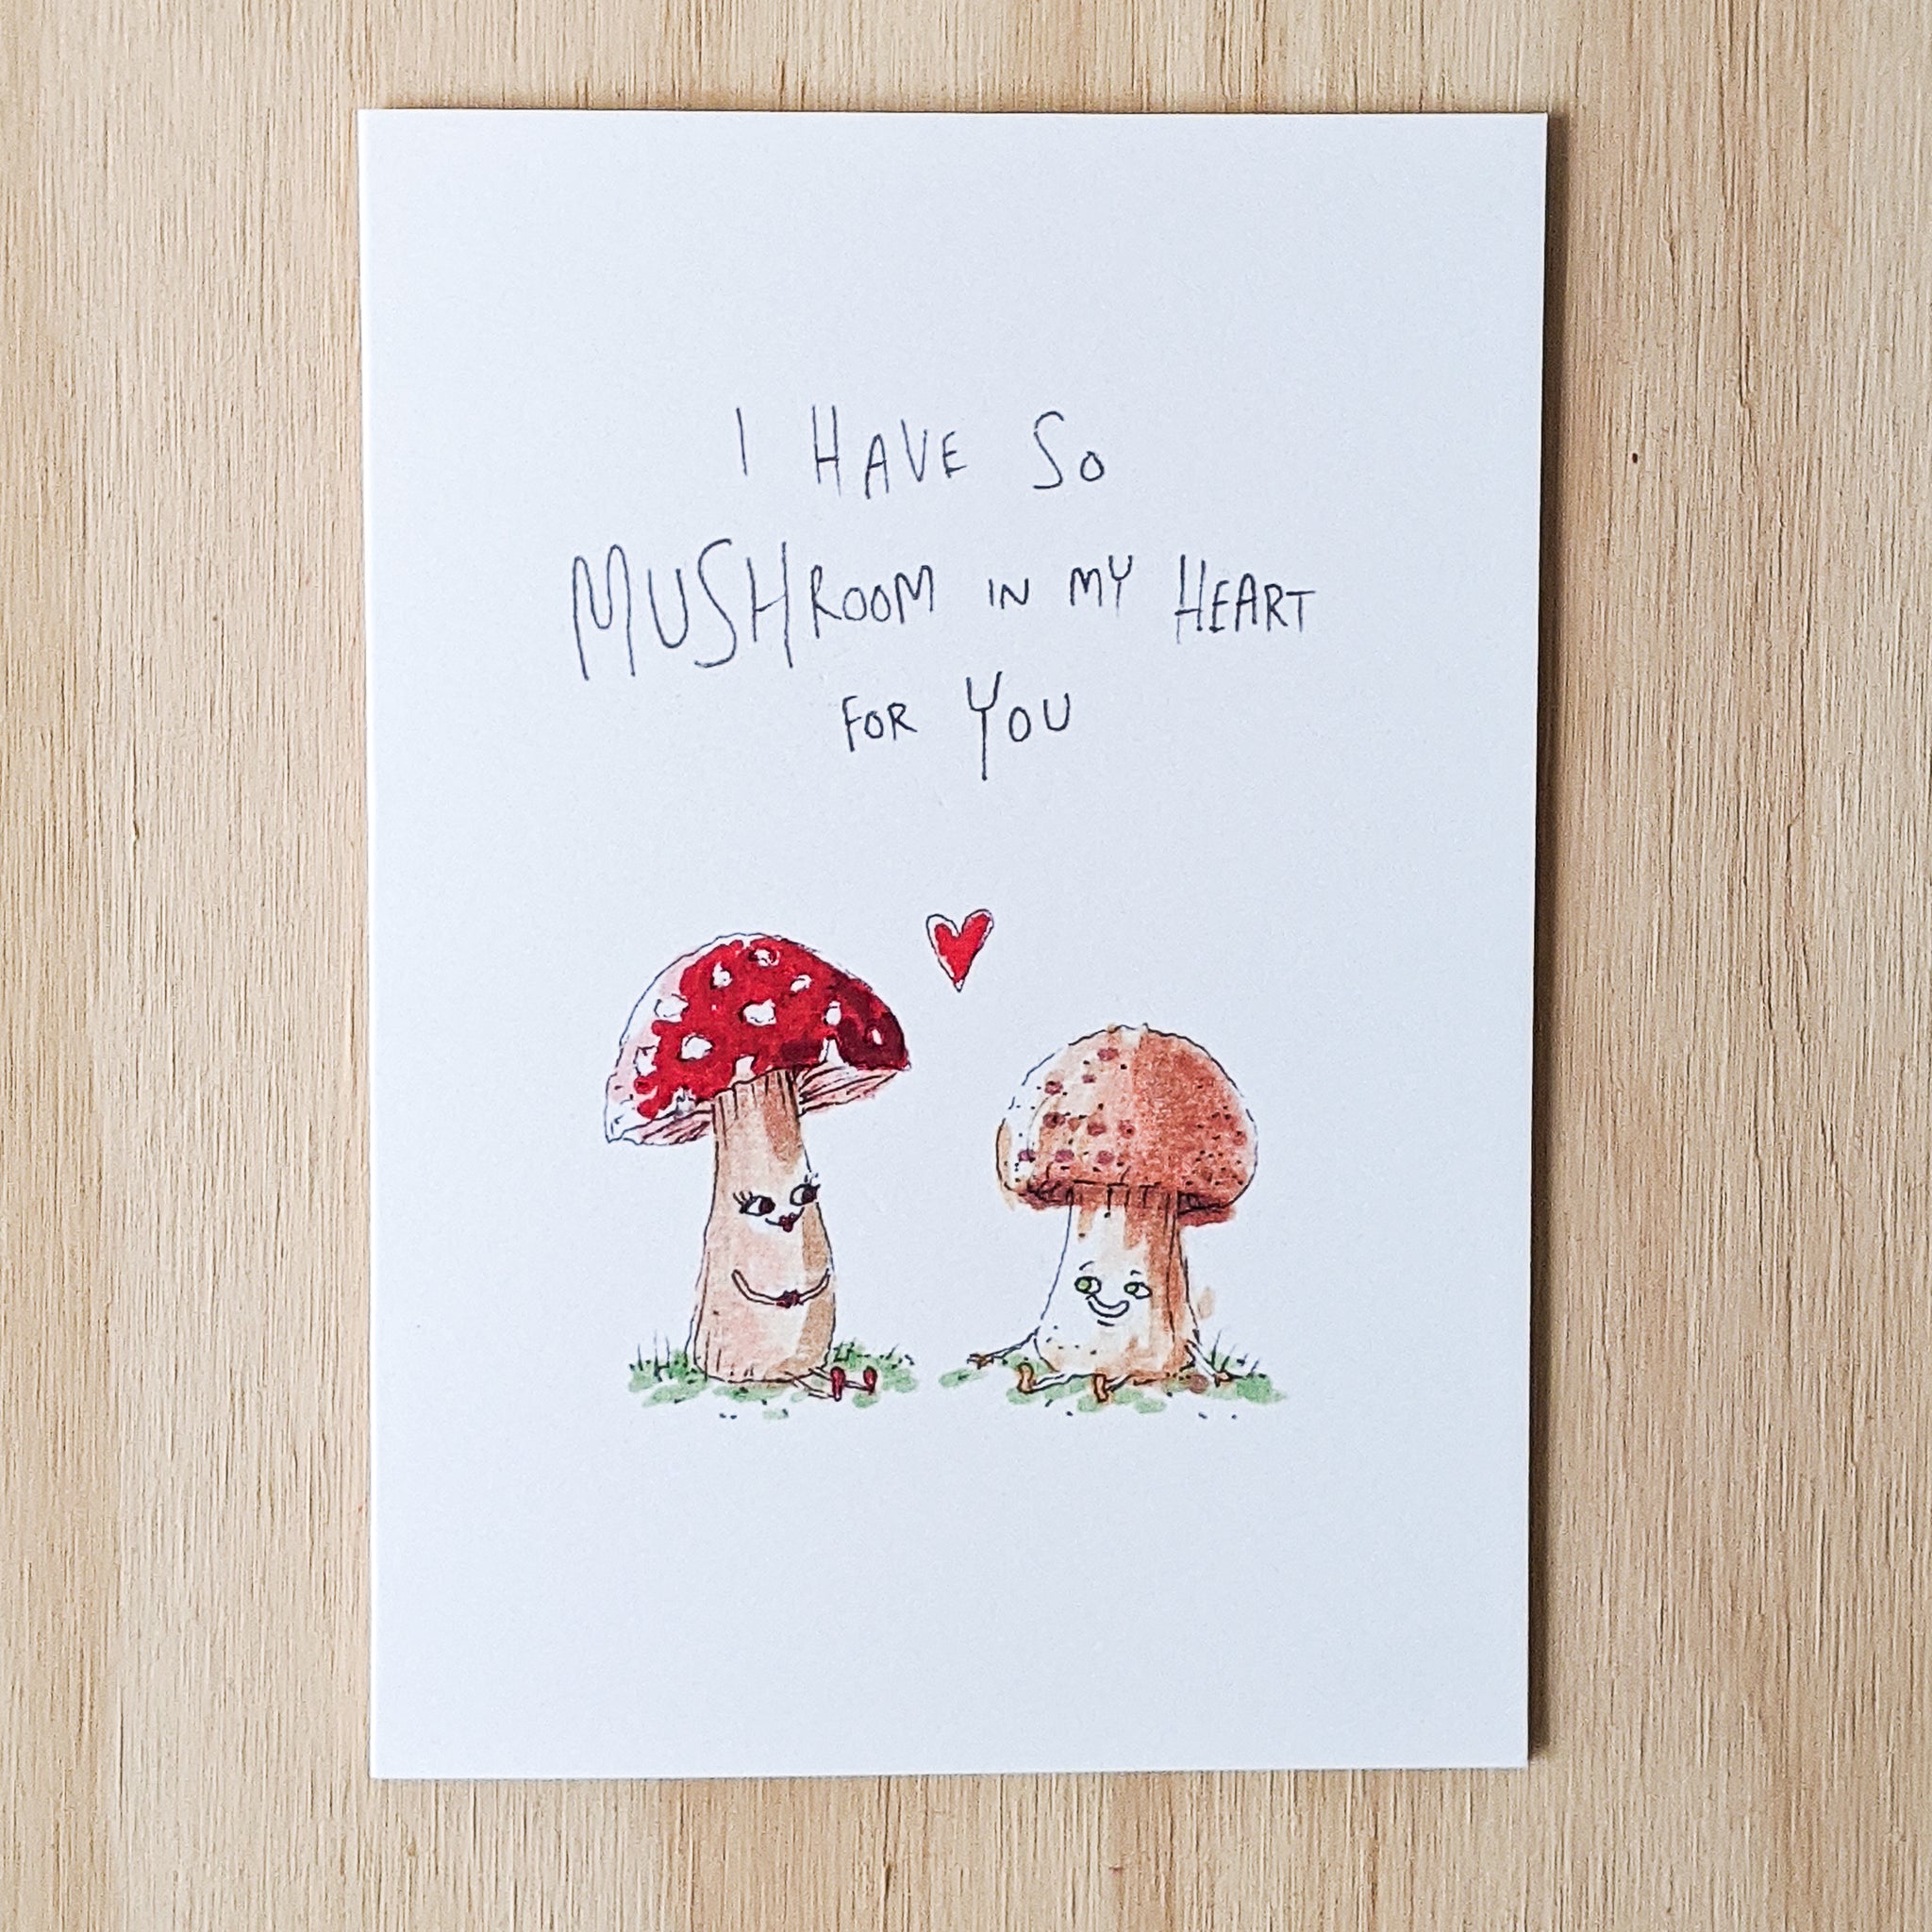 I Have So Mushroom In My Heart For You - Well Drawn